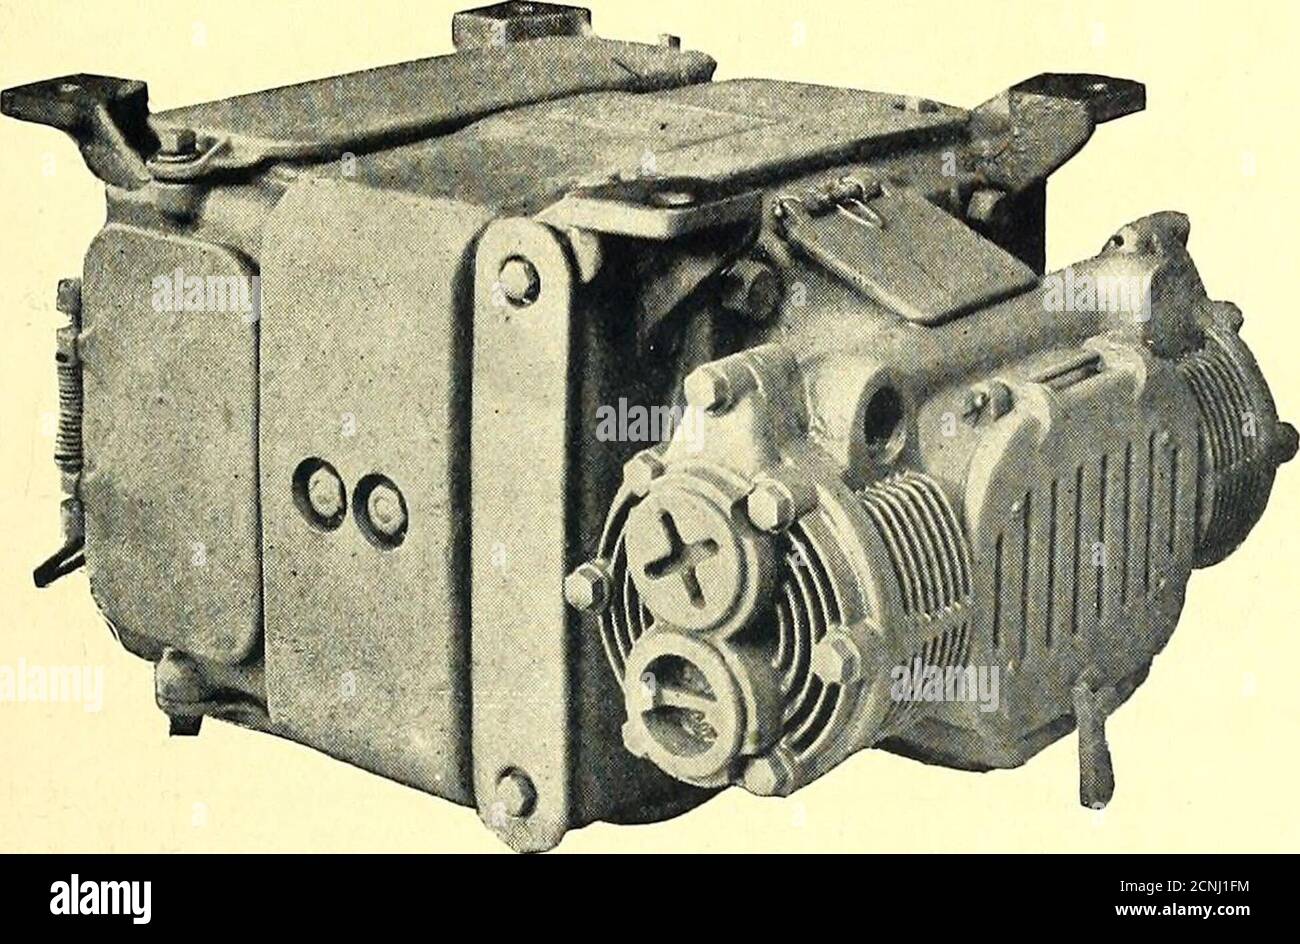 The Street railway journal . STREET RAILWAY JOURNAL. 109 GENERAL ELECTRIC  COMPANYS Direct=CoupledElectrically Driven Air Compressors. C P-J4 Air  Compressor, Compressed End /TrHESE compressors are widelyused for operating  air brakes andwhistles